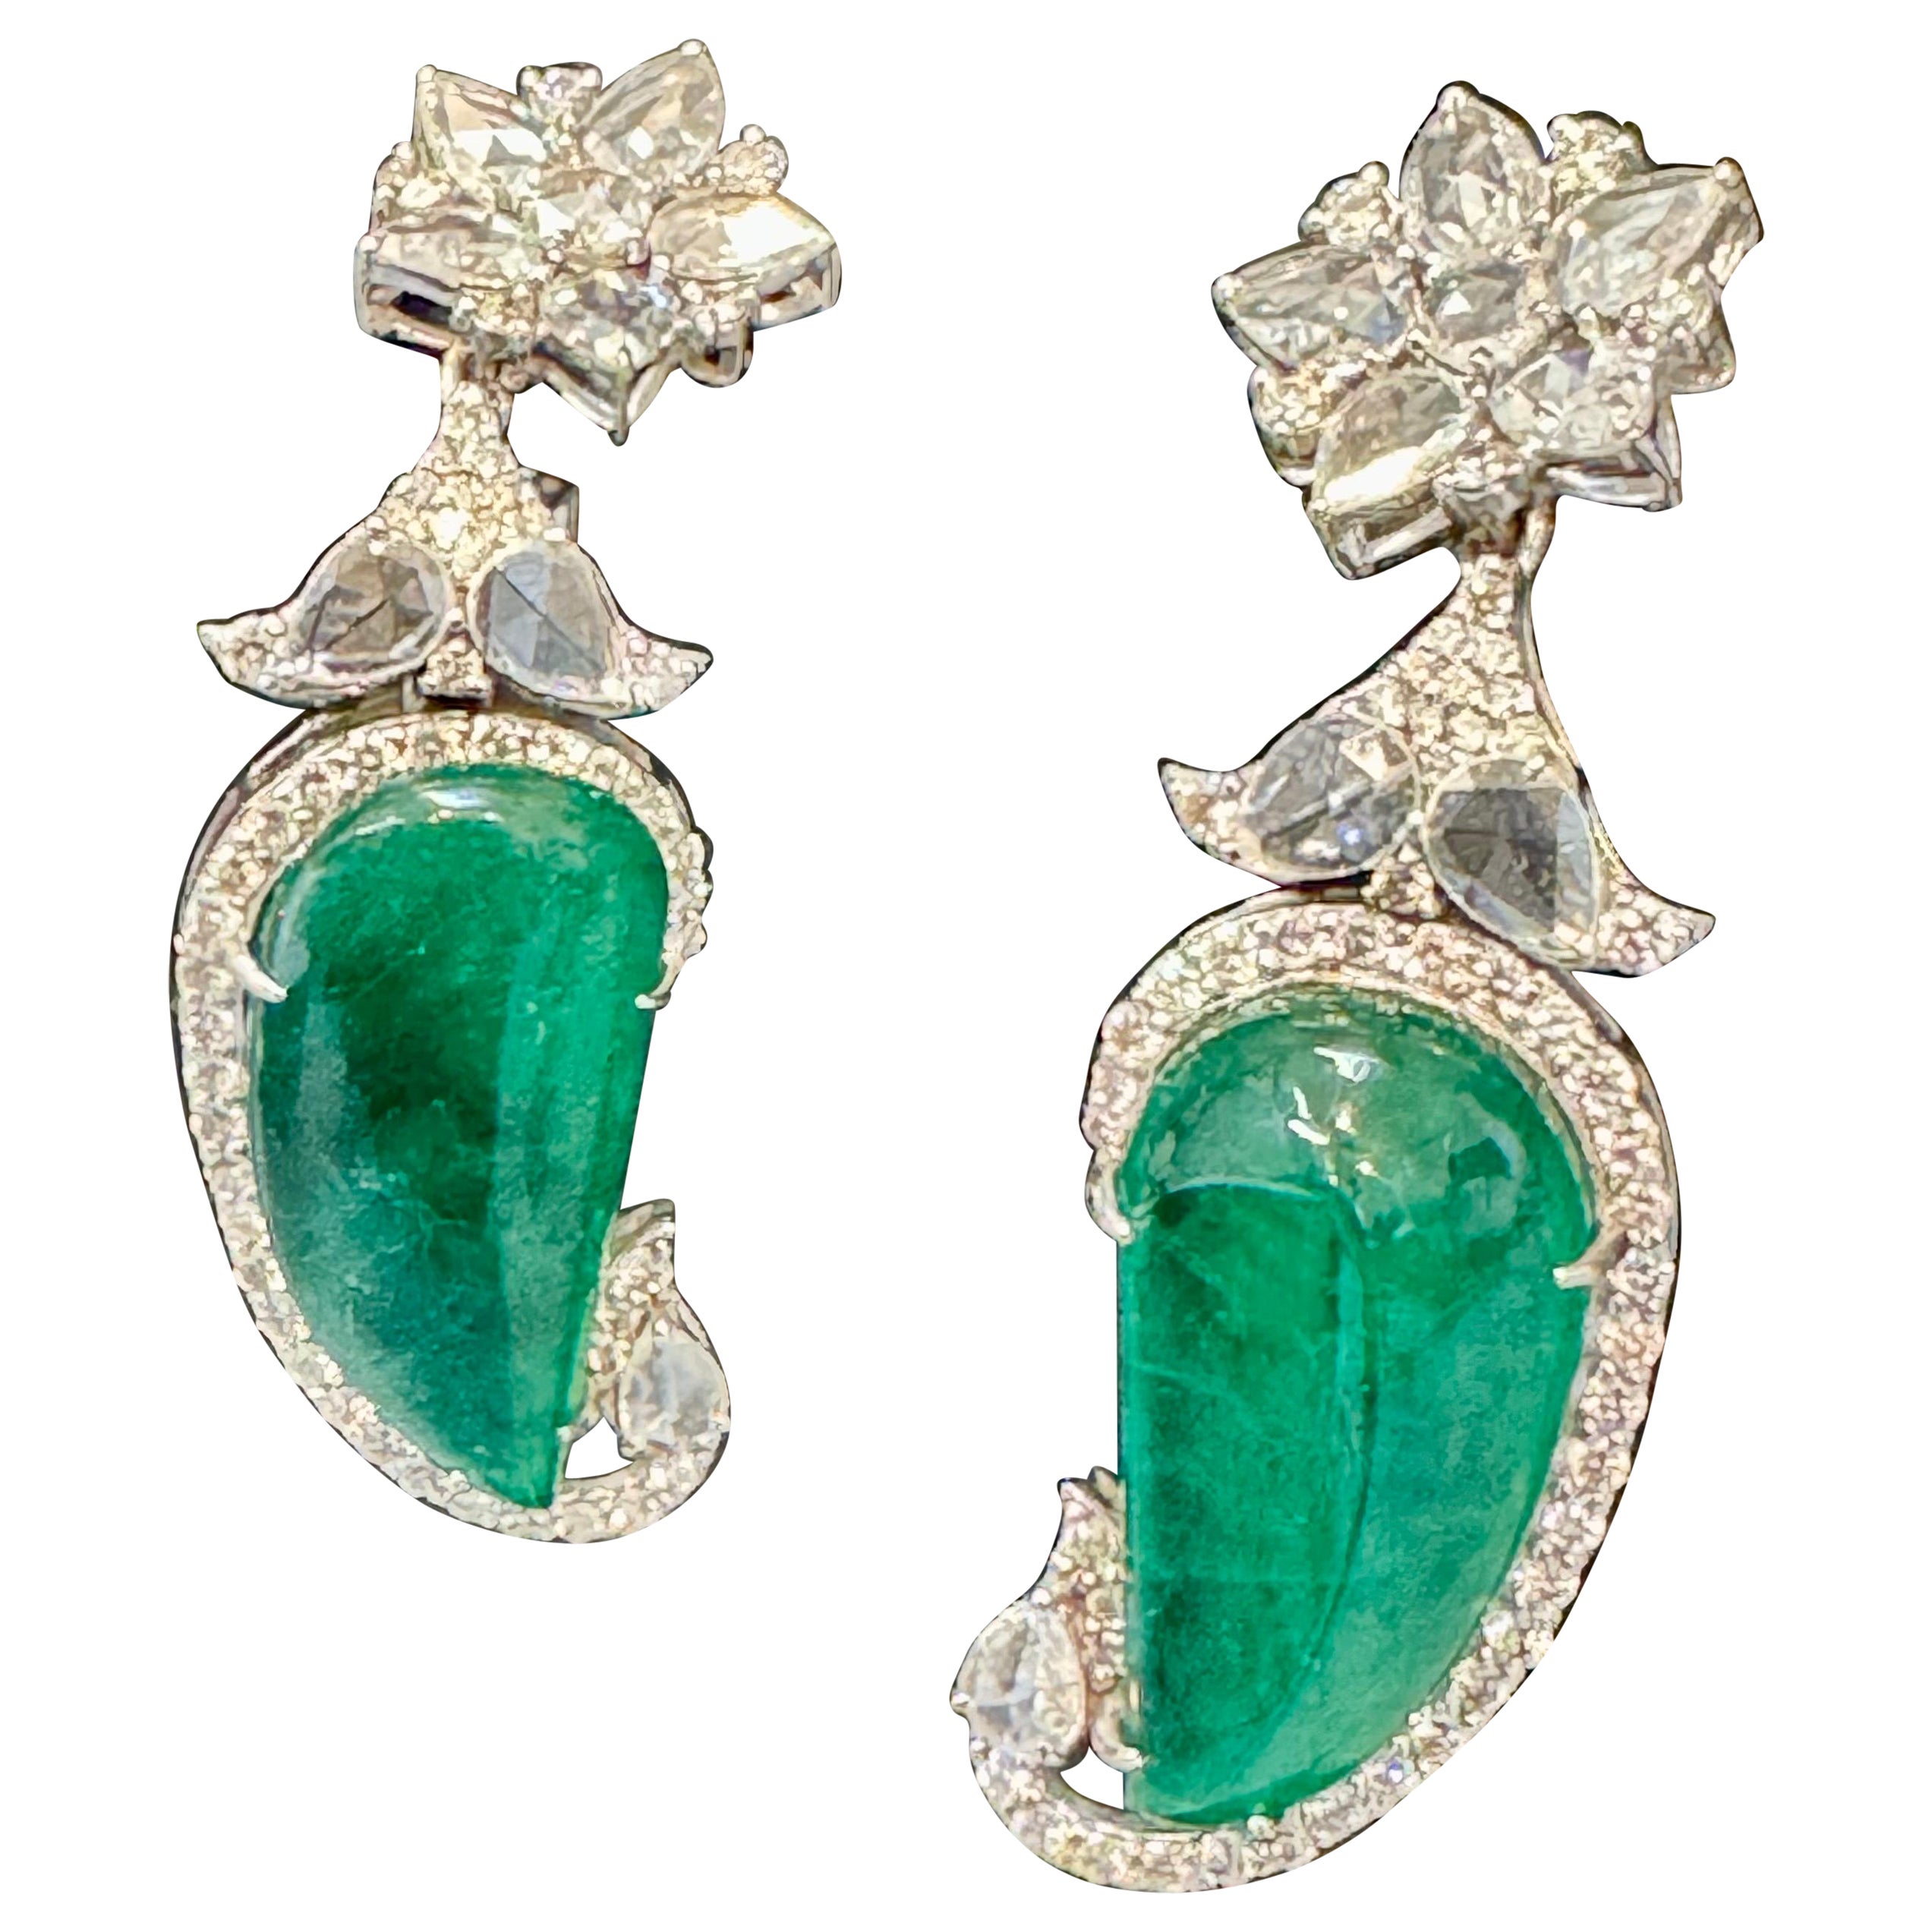 20 Ct Fine Emerald Cabochon & 4 Ct Rose Cut Diamond  18 Kt White Gold  Earrings For Sale